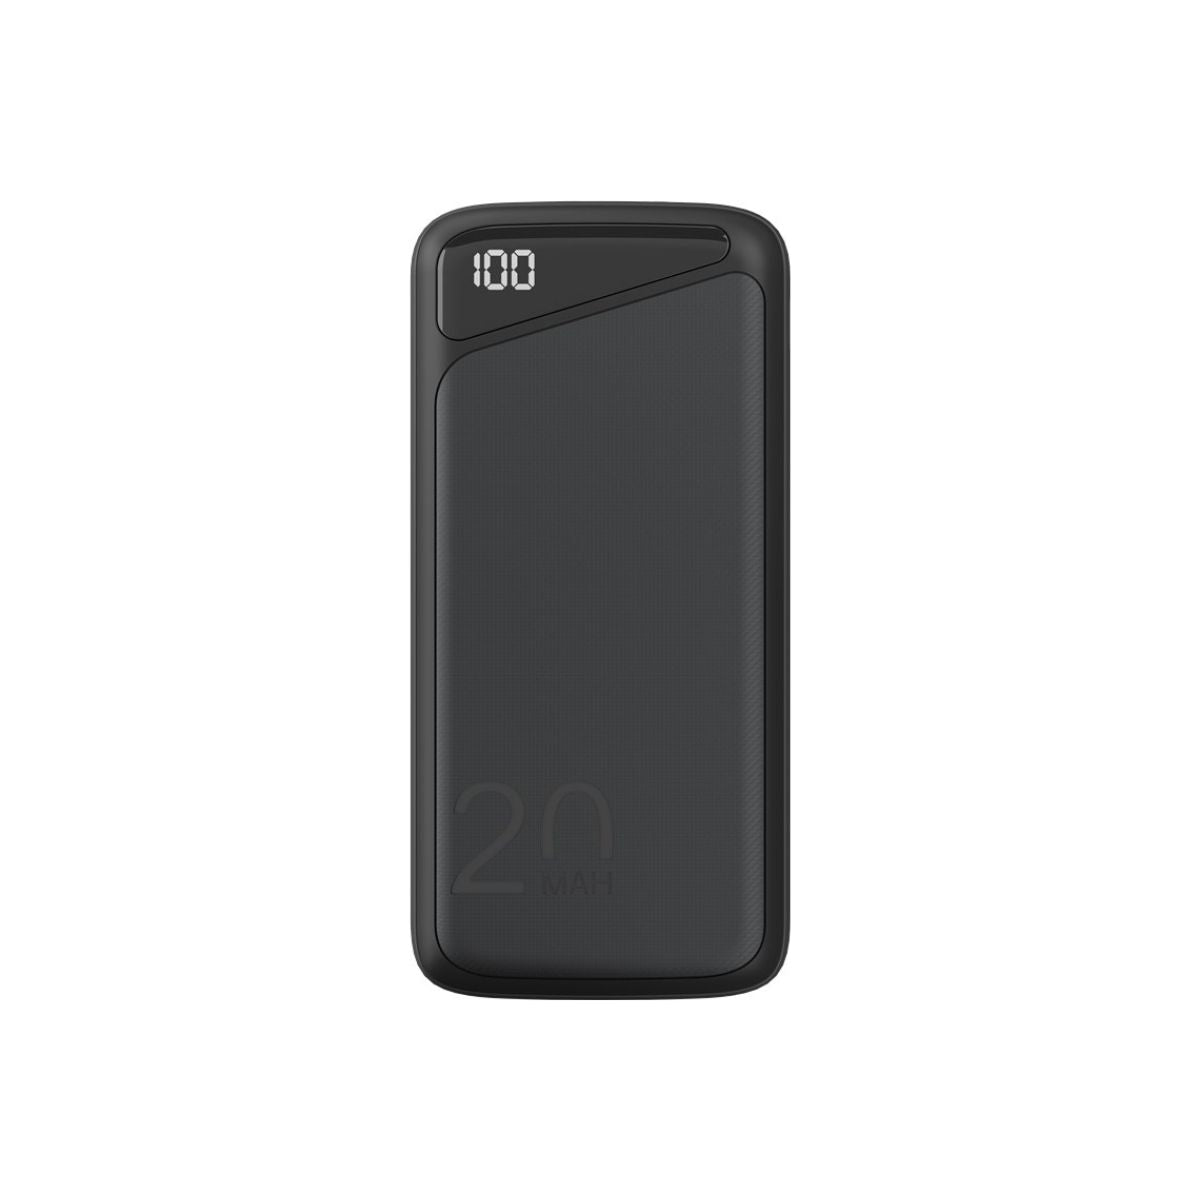 Goobay QC 3.0 Power Bank 20,000 mAh with Quick Charge Function/External Battery/Power Bank for Smartphone & Tablet/Charger Powerpack with 2 USB-A Ports, Black, Compact